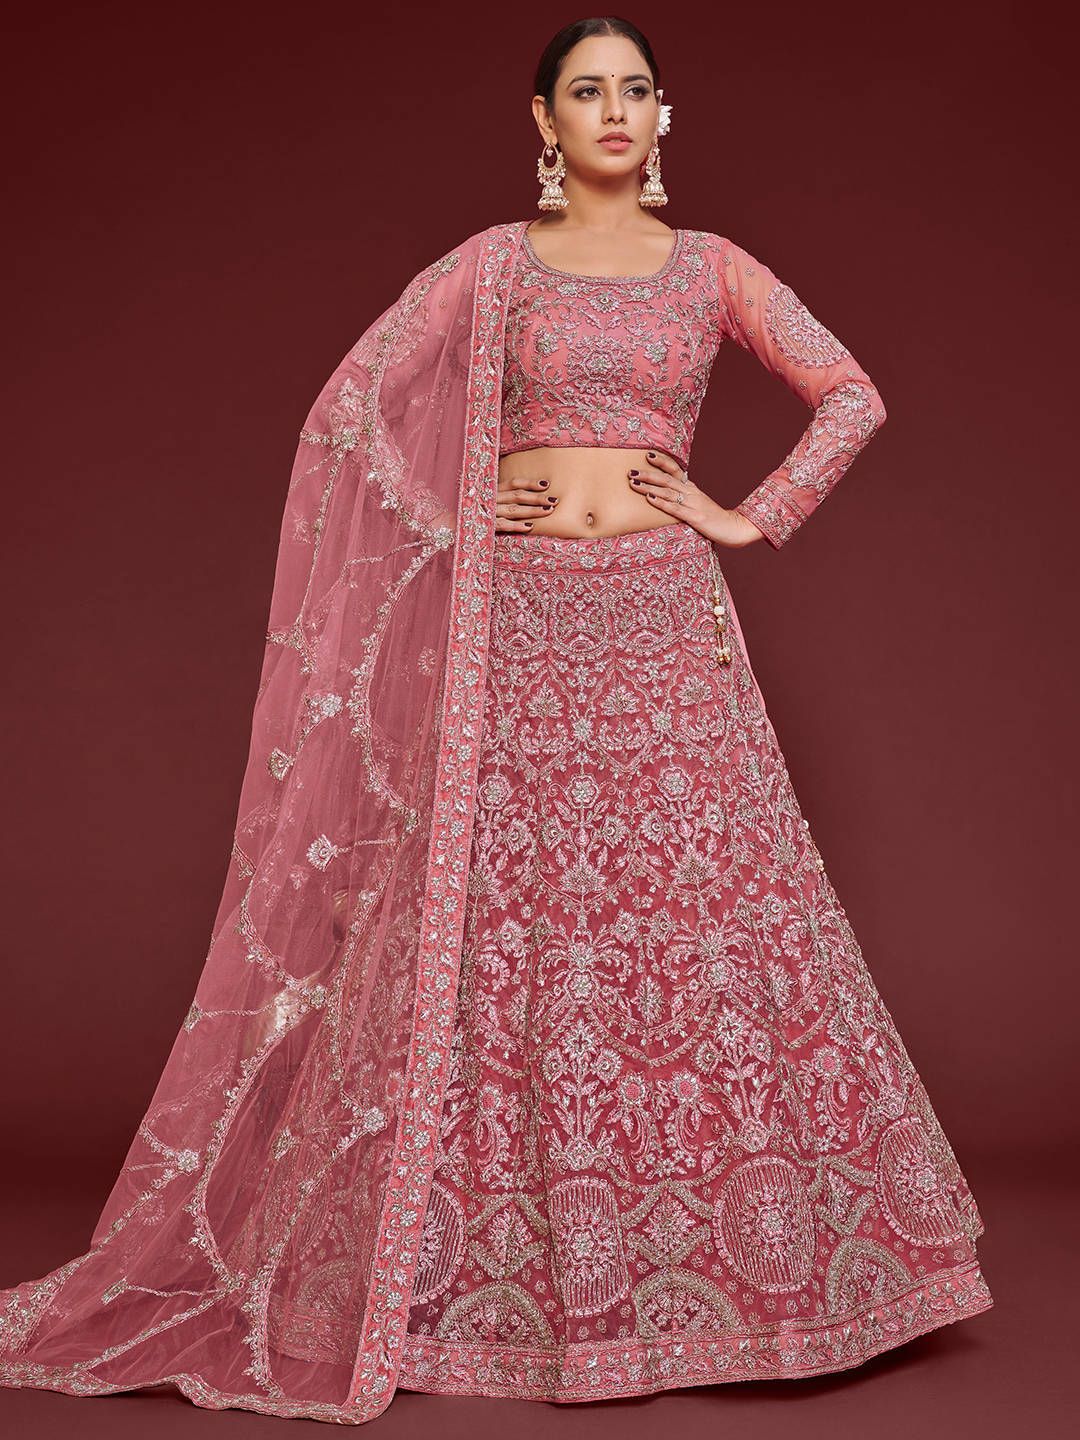 FABPIXEL Coral & White Embroidered Semi-Stitched Lehenga Choli Price in India